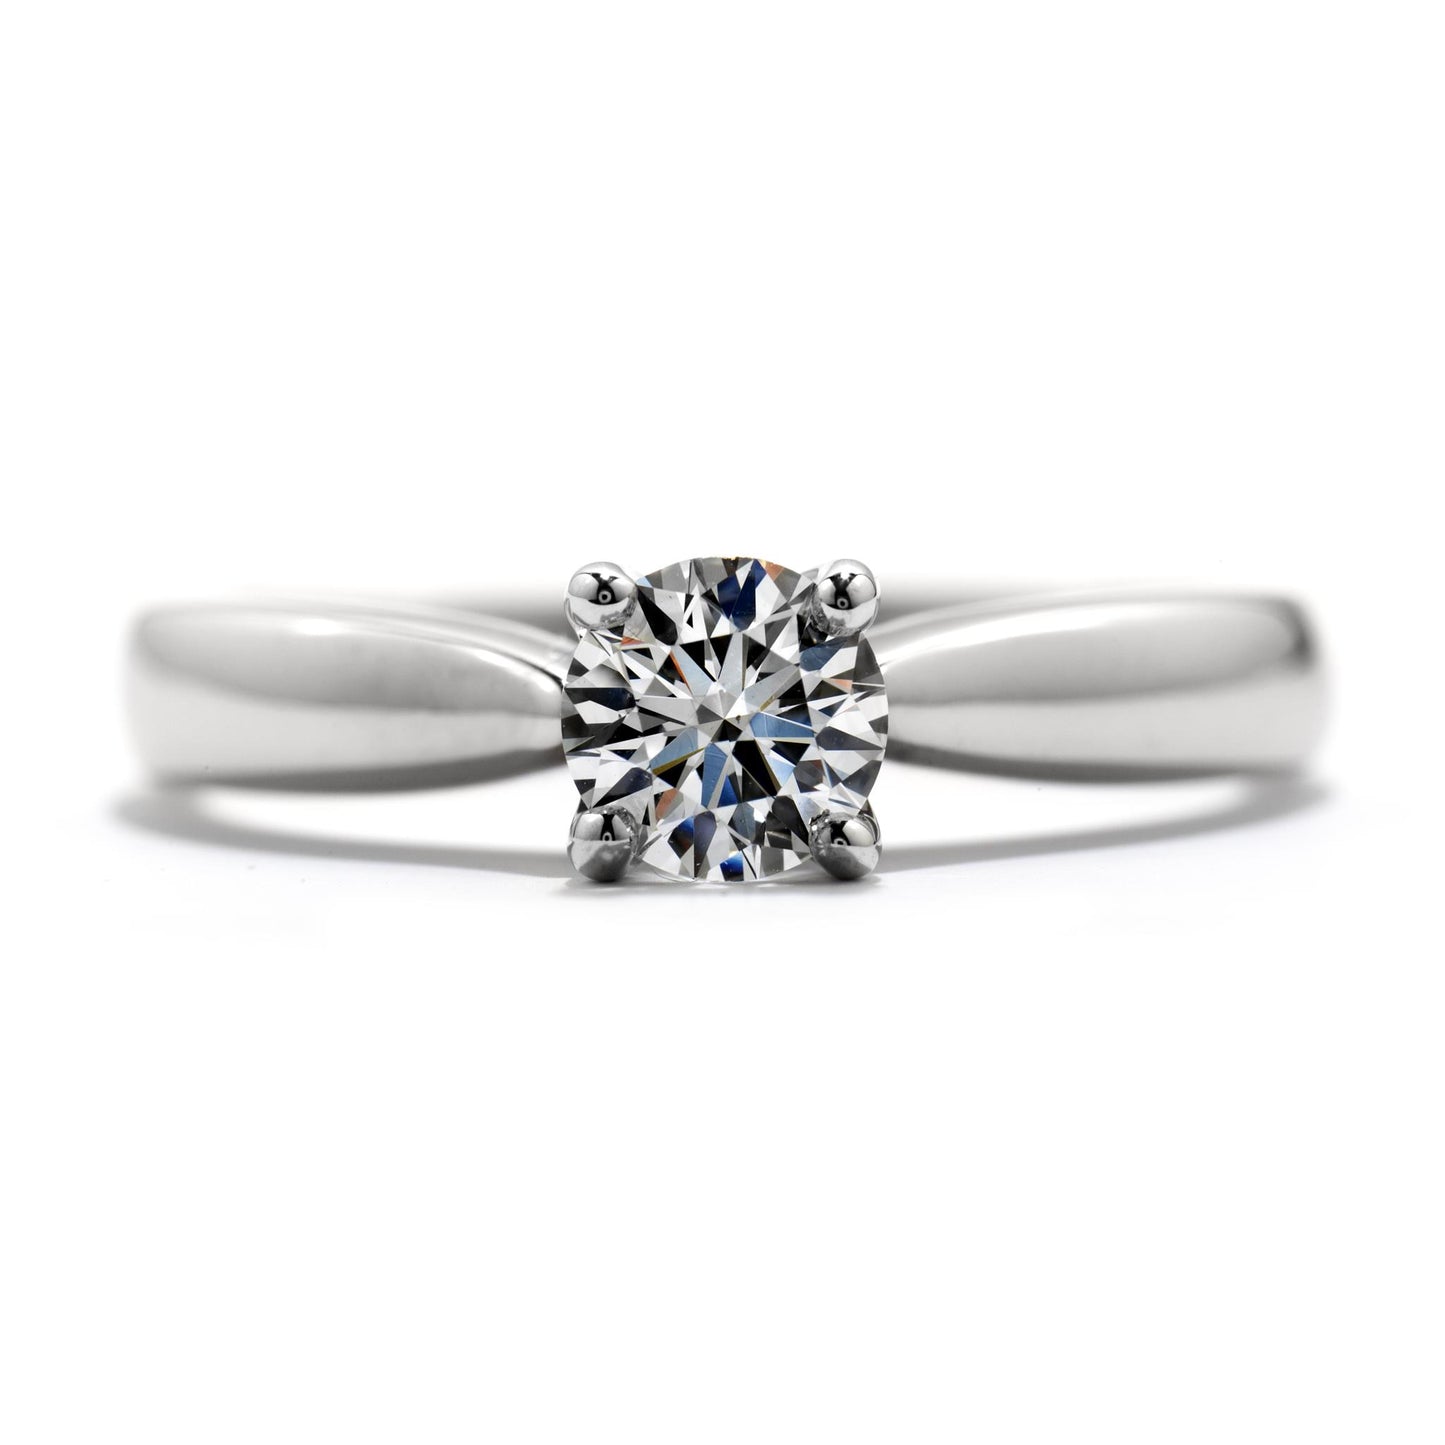 Serenity Select Solitaire